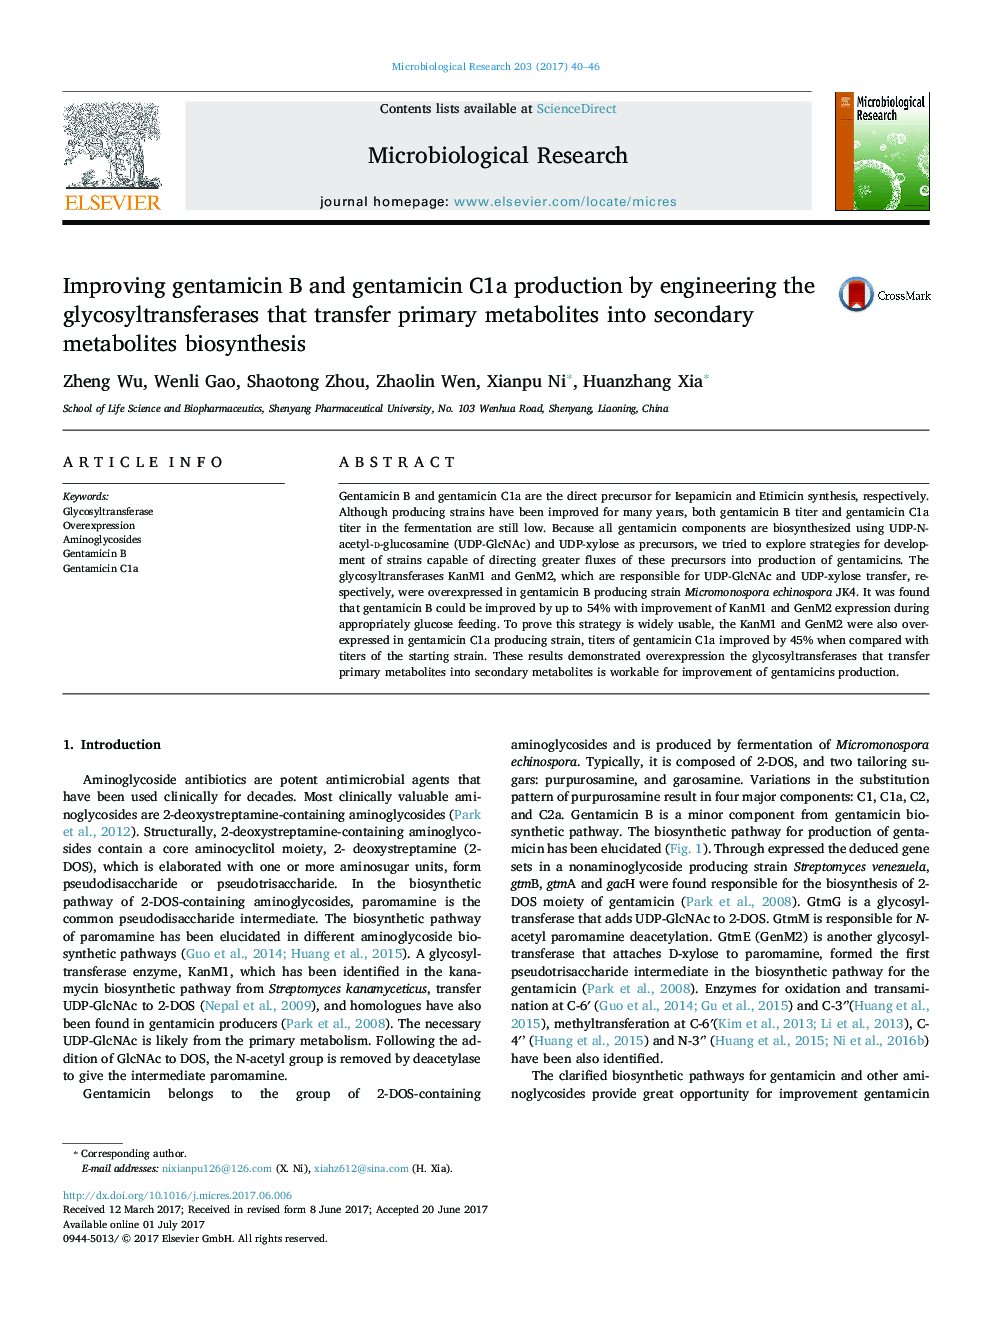 Improving gentamicin B and gentamicin C1a production by engineering the glycosyltransferases that transfer primary metabolites into secondary metabolites biosynthesis